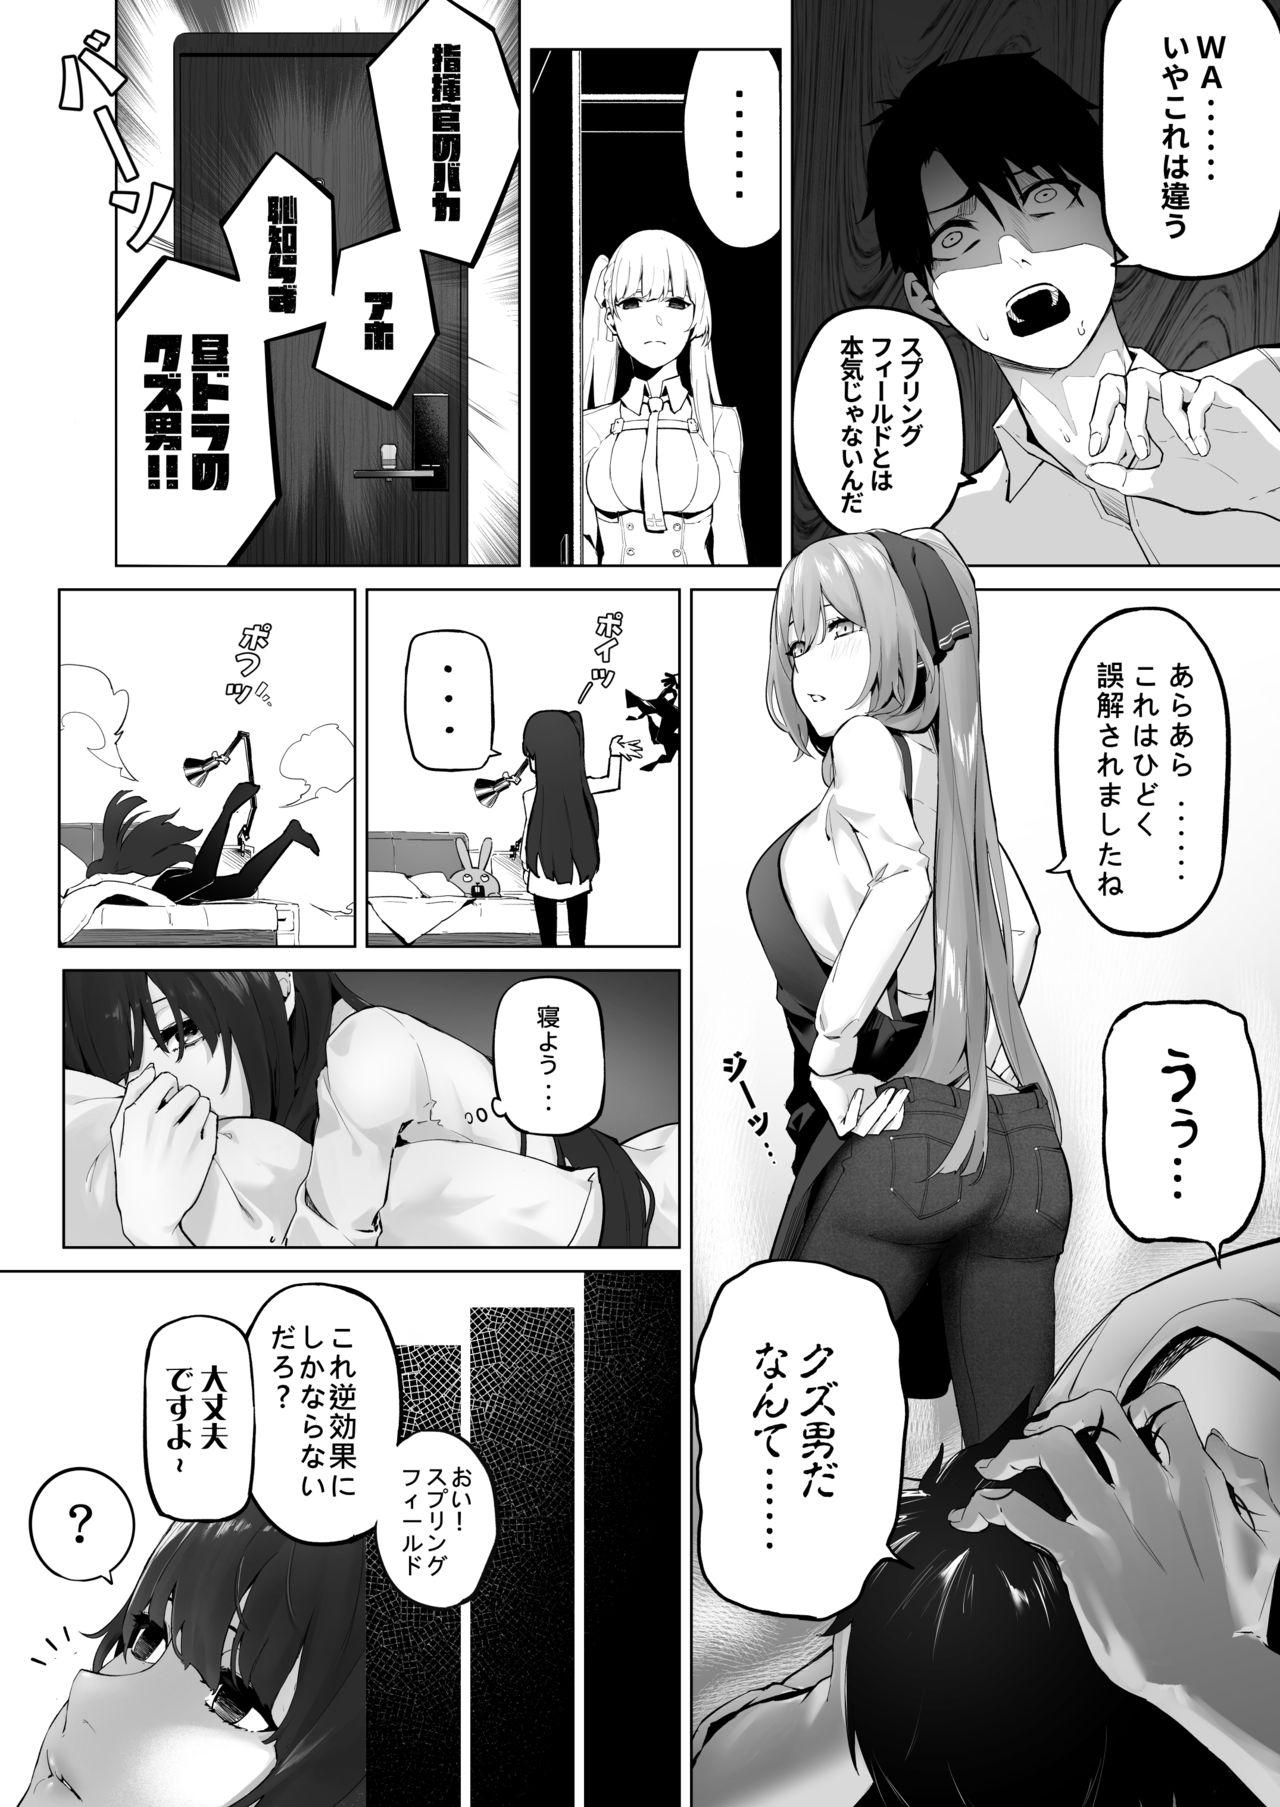 Magrinha Field on Fire II - Girls frontline Asians - Page 3